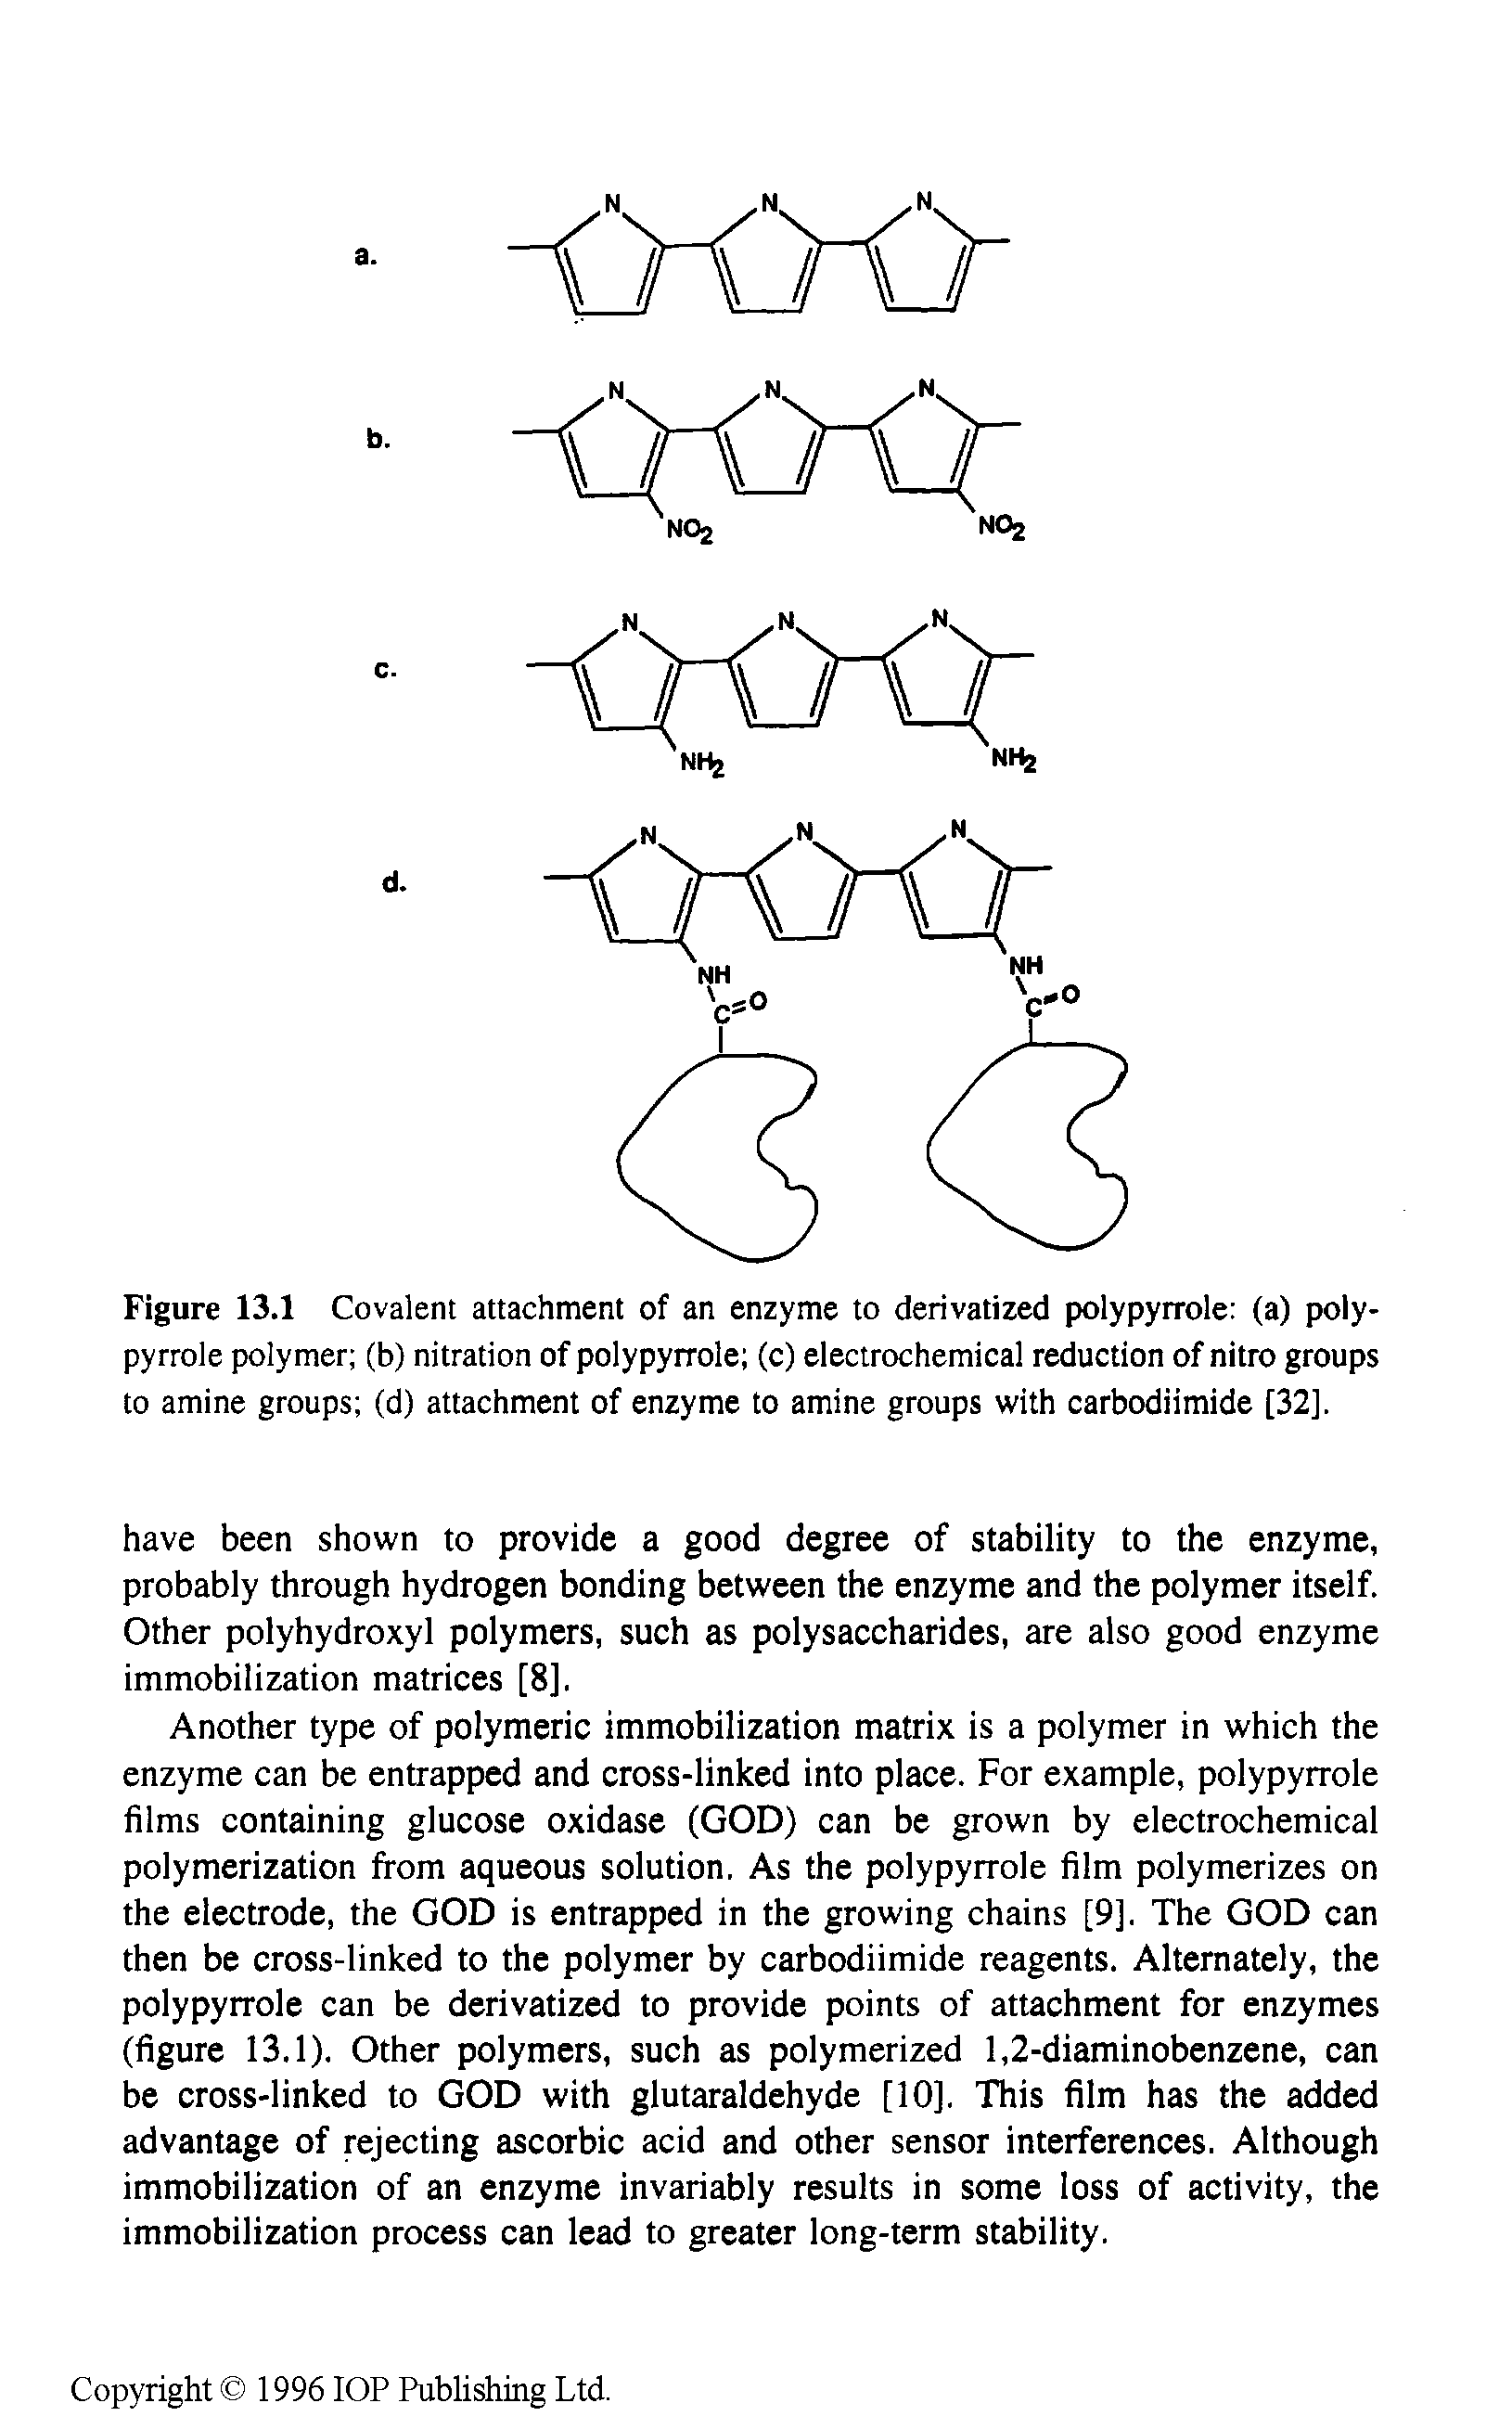 Figure 13.1 Covalent attachment of an enzyme to derivatized polypyrrole (a) polypyrrole polymer (b) nitration of polypyrrole (c) electrochemical reduction of nitro groups to amine groups (d) attachment of enzyme to amine groups with carbodiimide [32],...